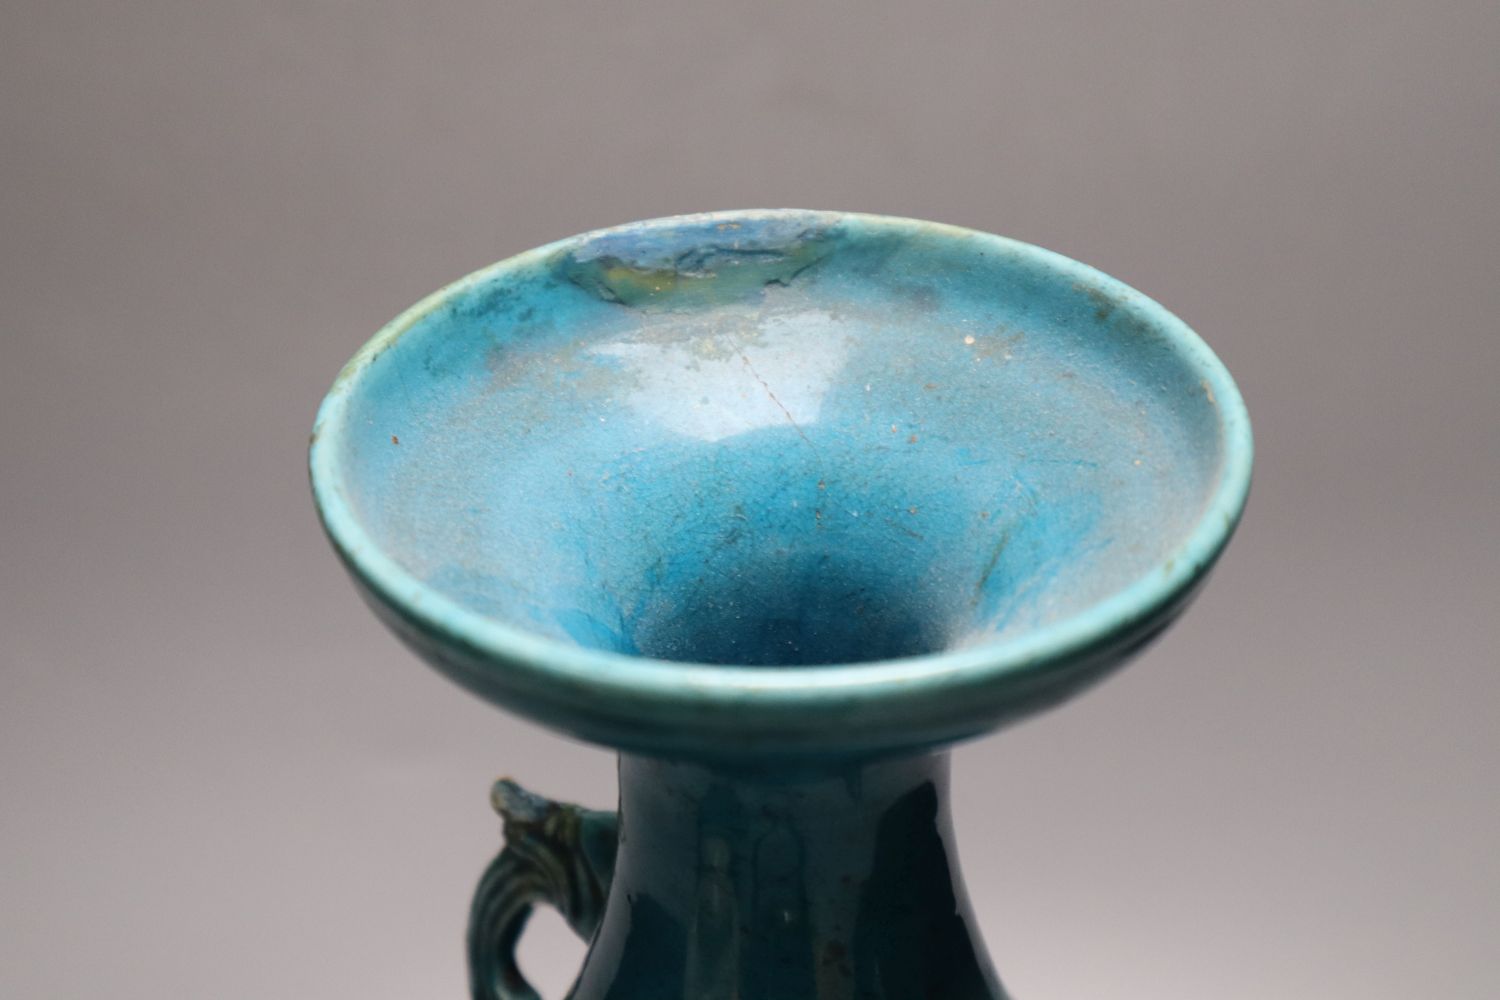 A 19th century Chinese crackleglaze squat bowl, with mask handles and a 19th century Chinese turquoise glazed baluster vase and two